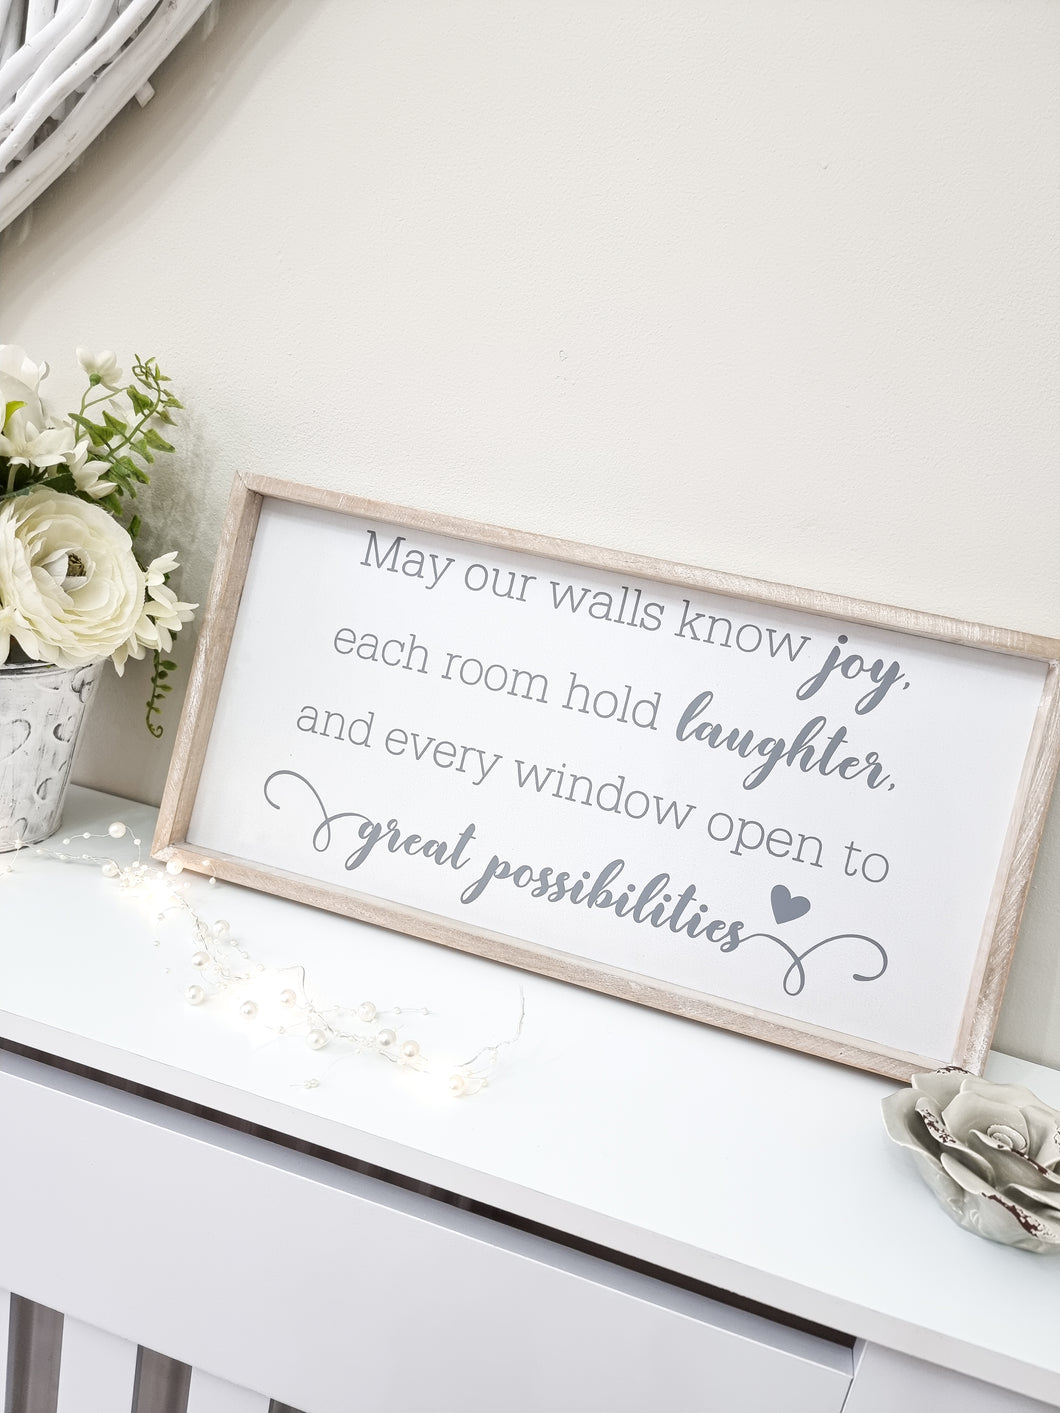 Joy, Laughter & Great Possibilities Framed Plaque